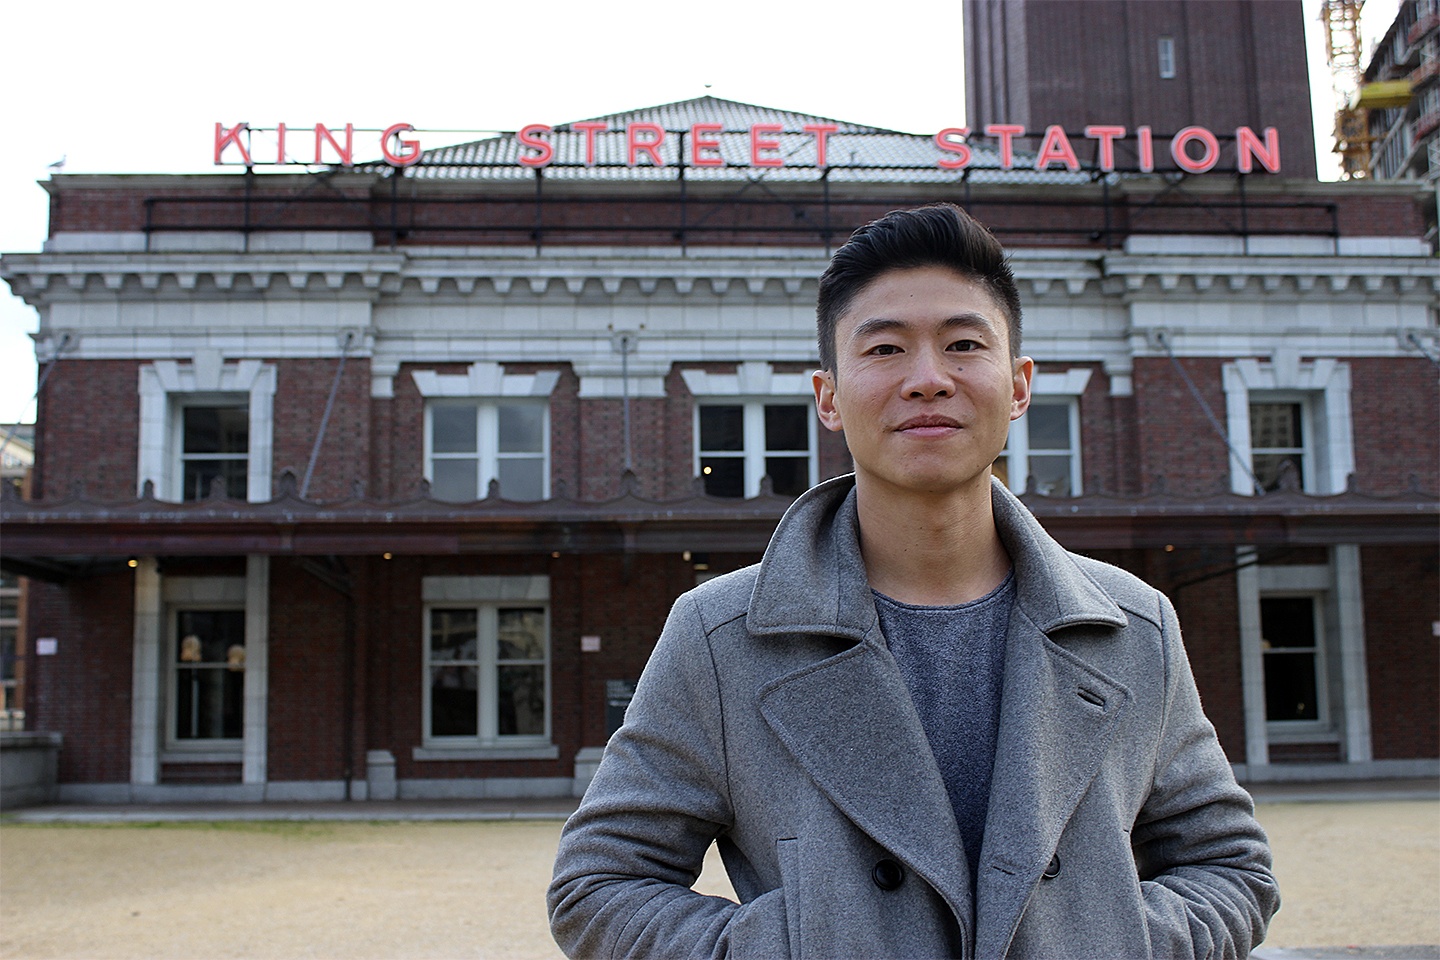 One Man’s Plan to Turn King Street Station Into an Immigrant Culinary Hub